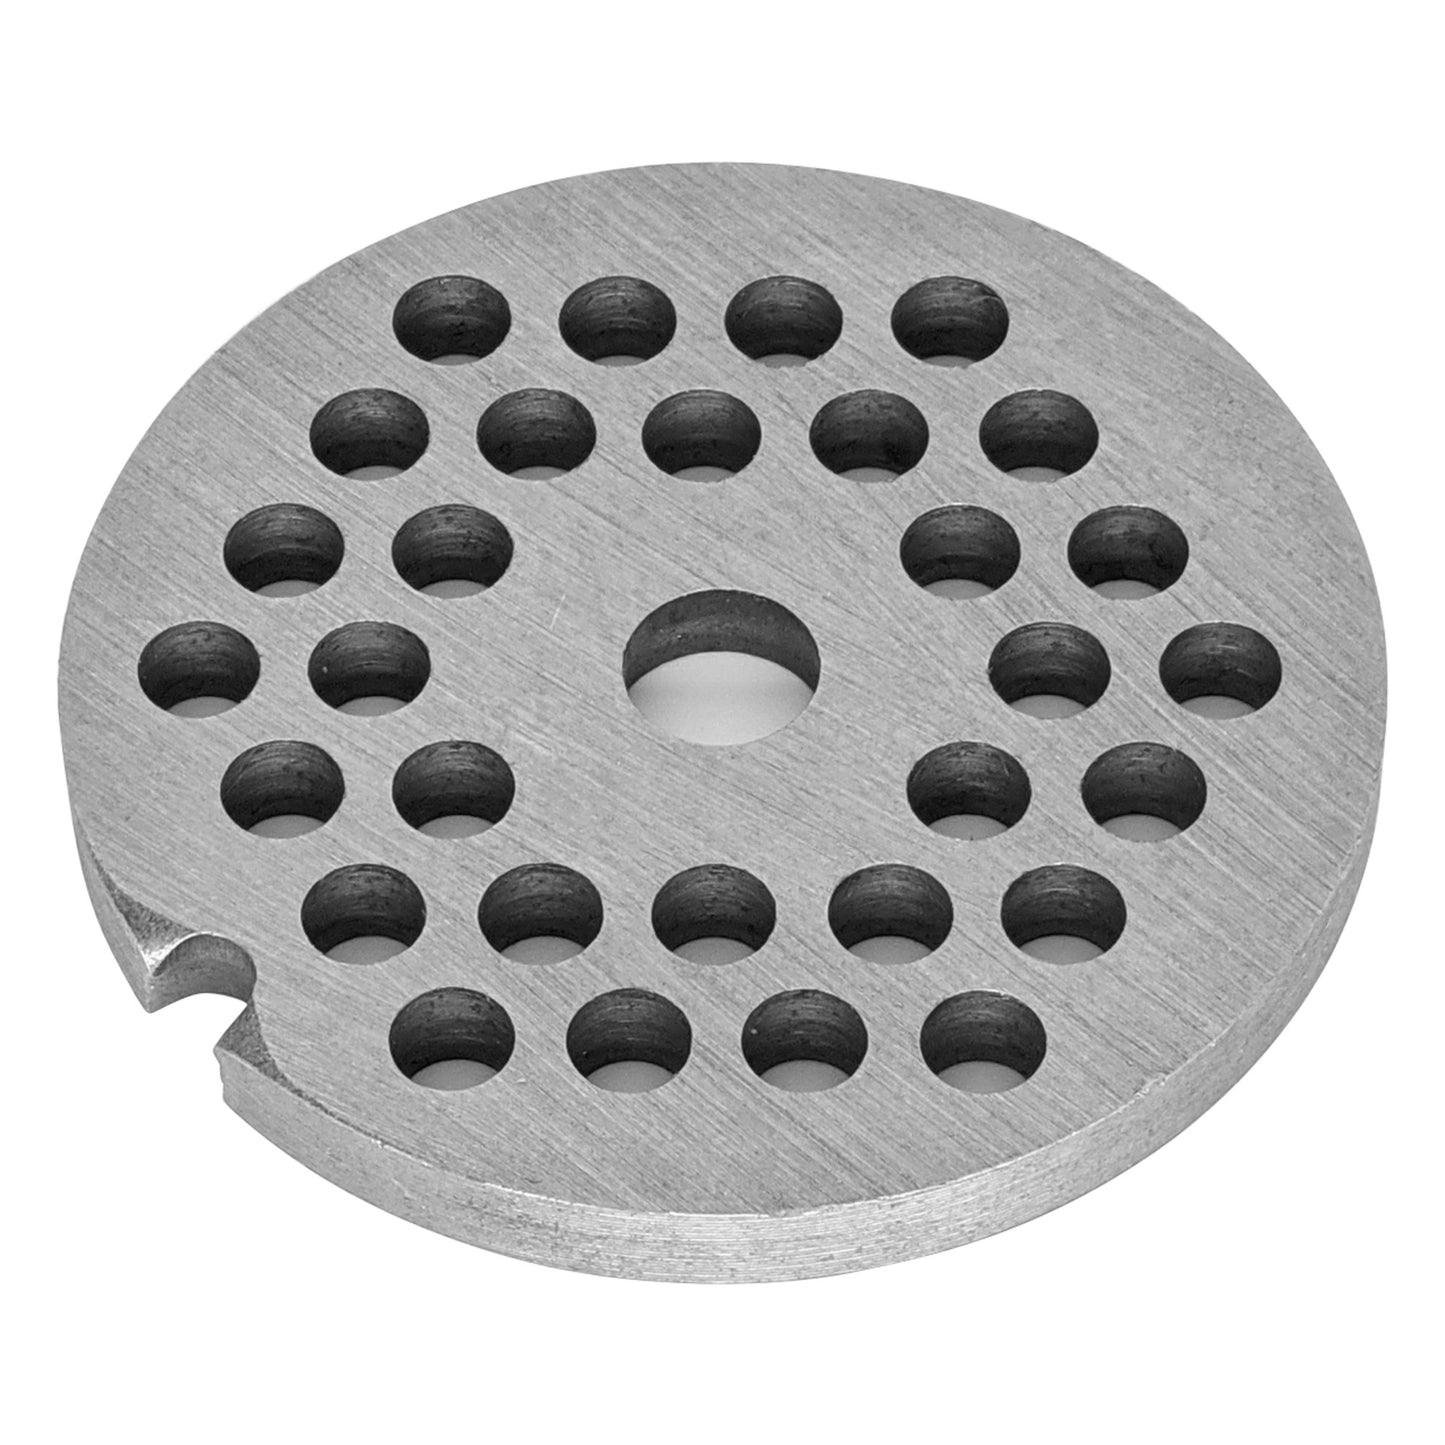 MG-1014 - Grinder Plate for MG-10 - 1/4" (6mm)